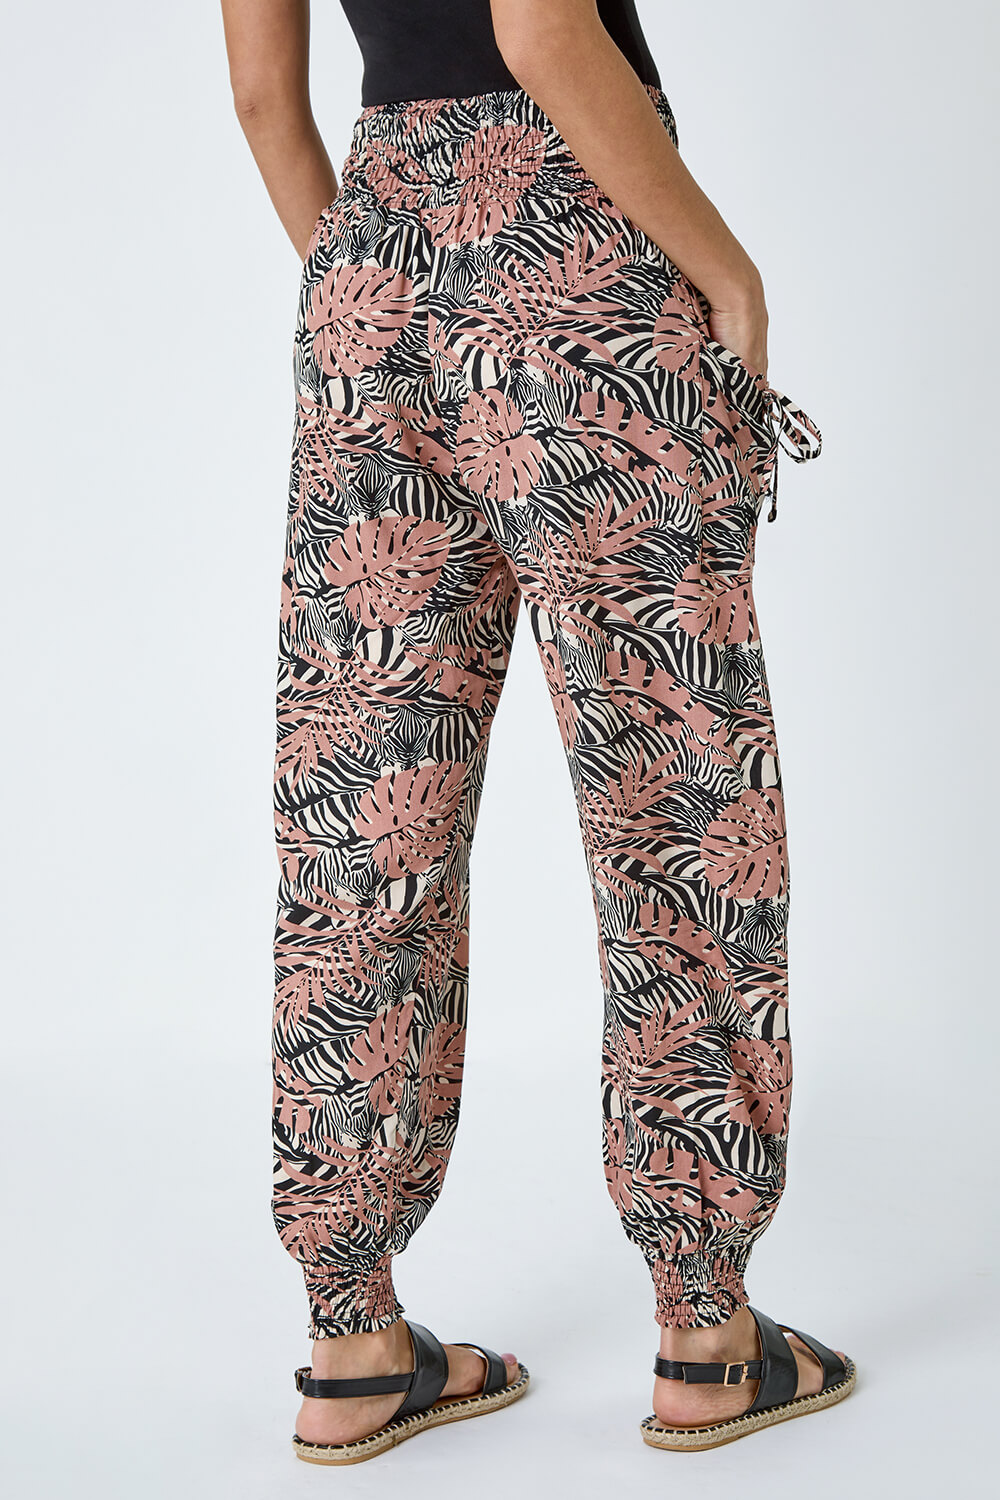 Black Tropical Print Stretch Hareem Trousers, Image 3 of 5